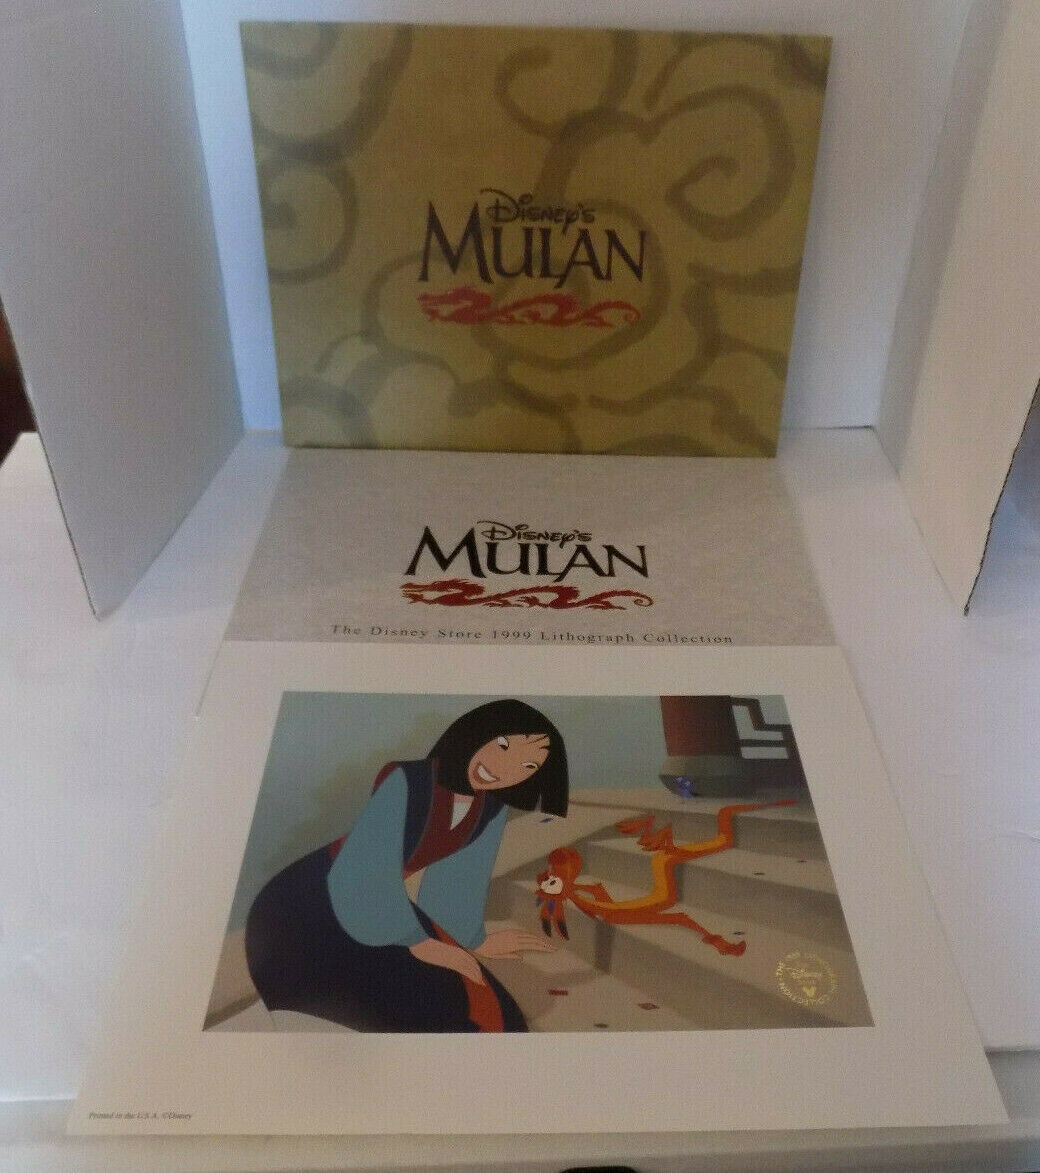 Primary image for Disney's Mulan Commemorative Lithograph 1999 Collection